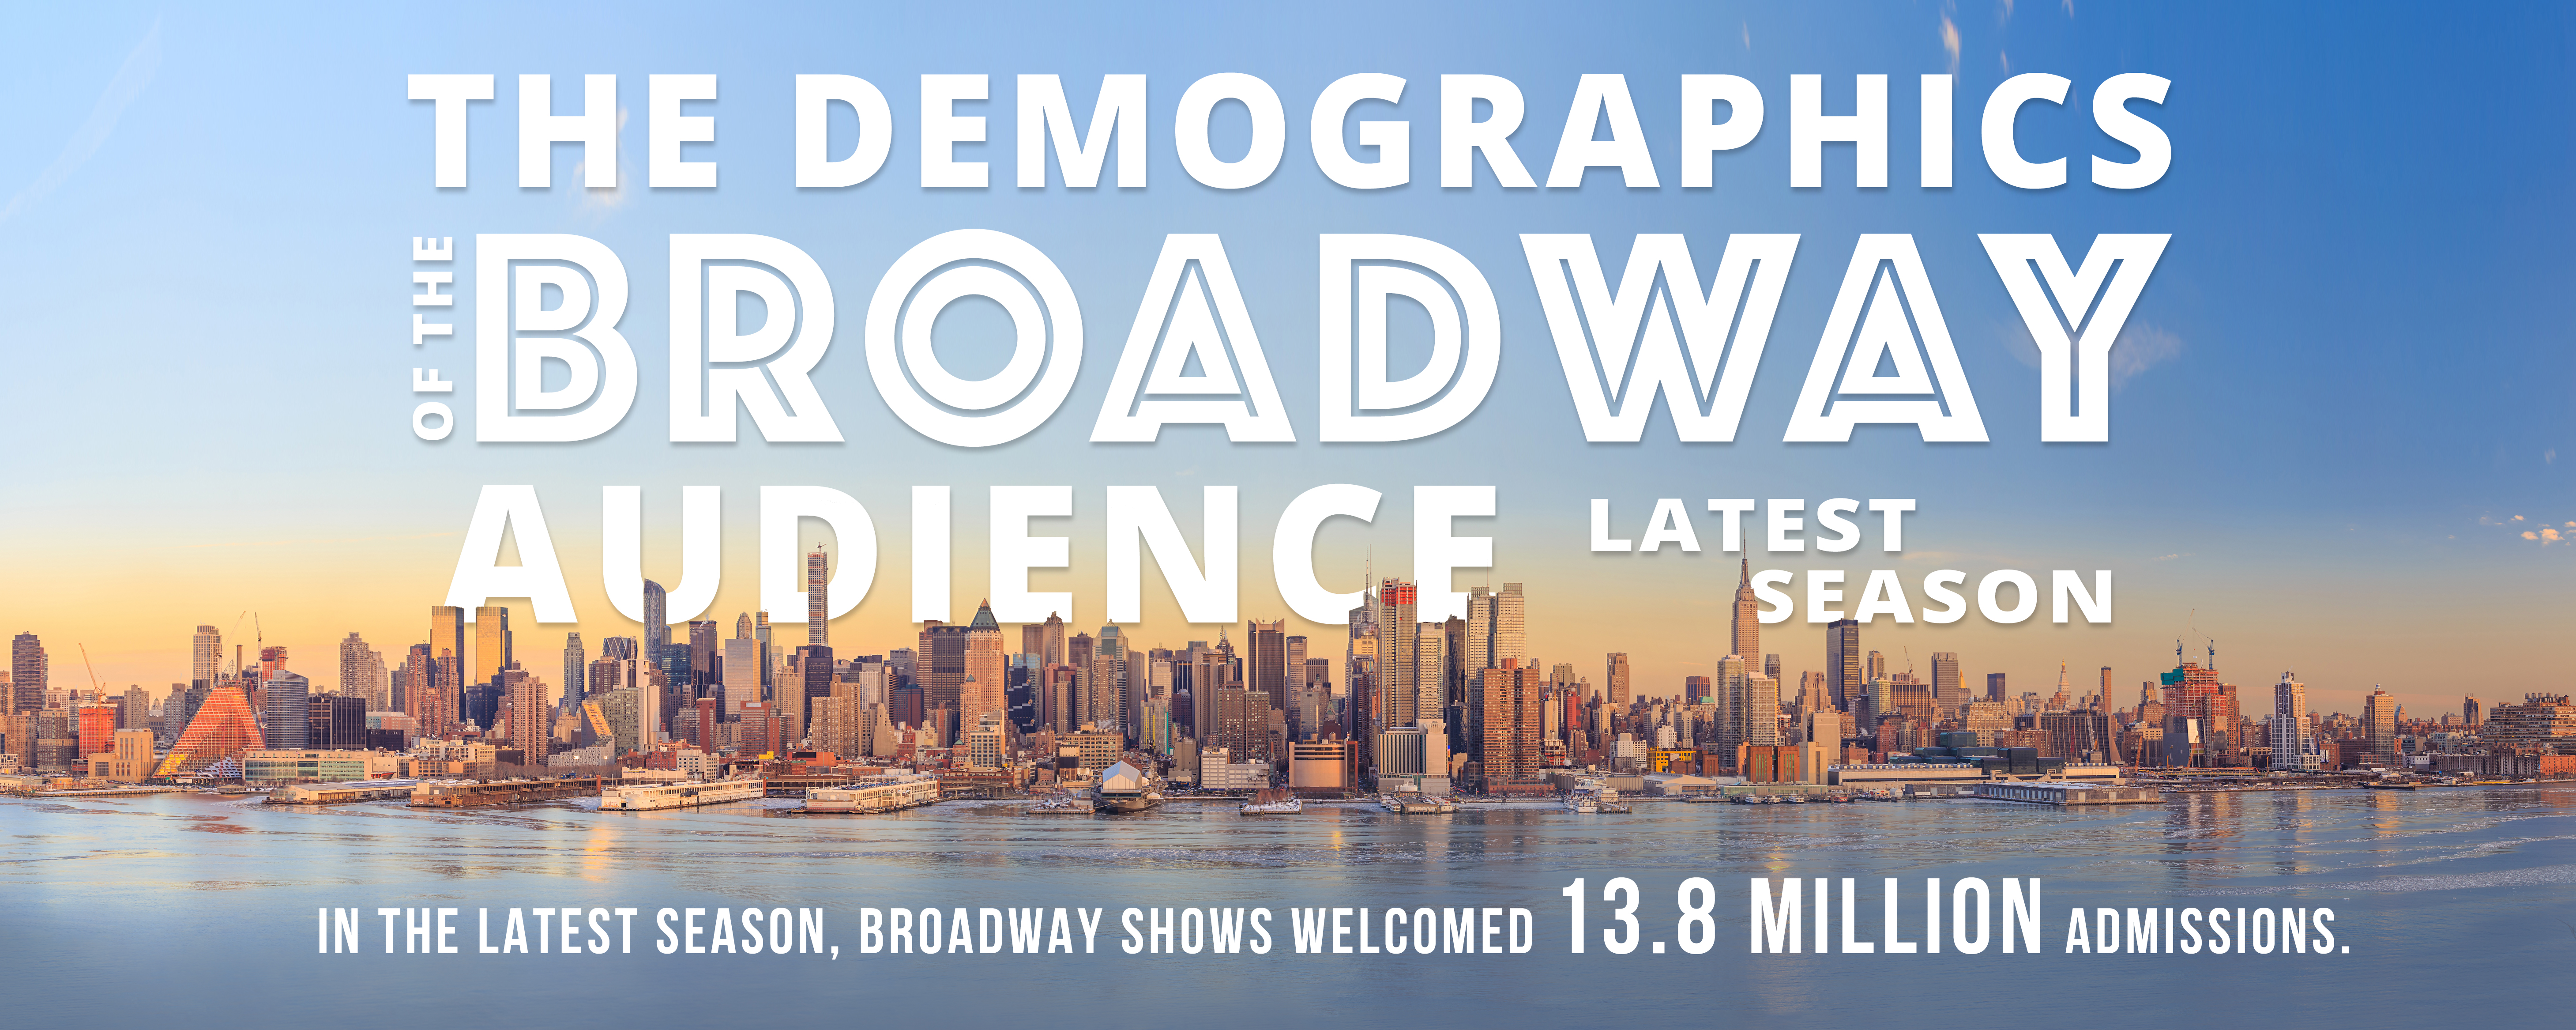 The demographics of the broadway audience